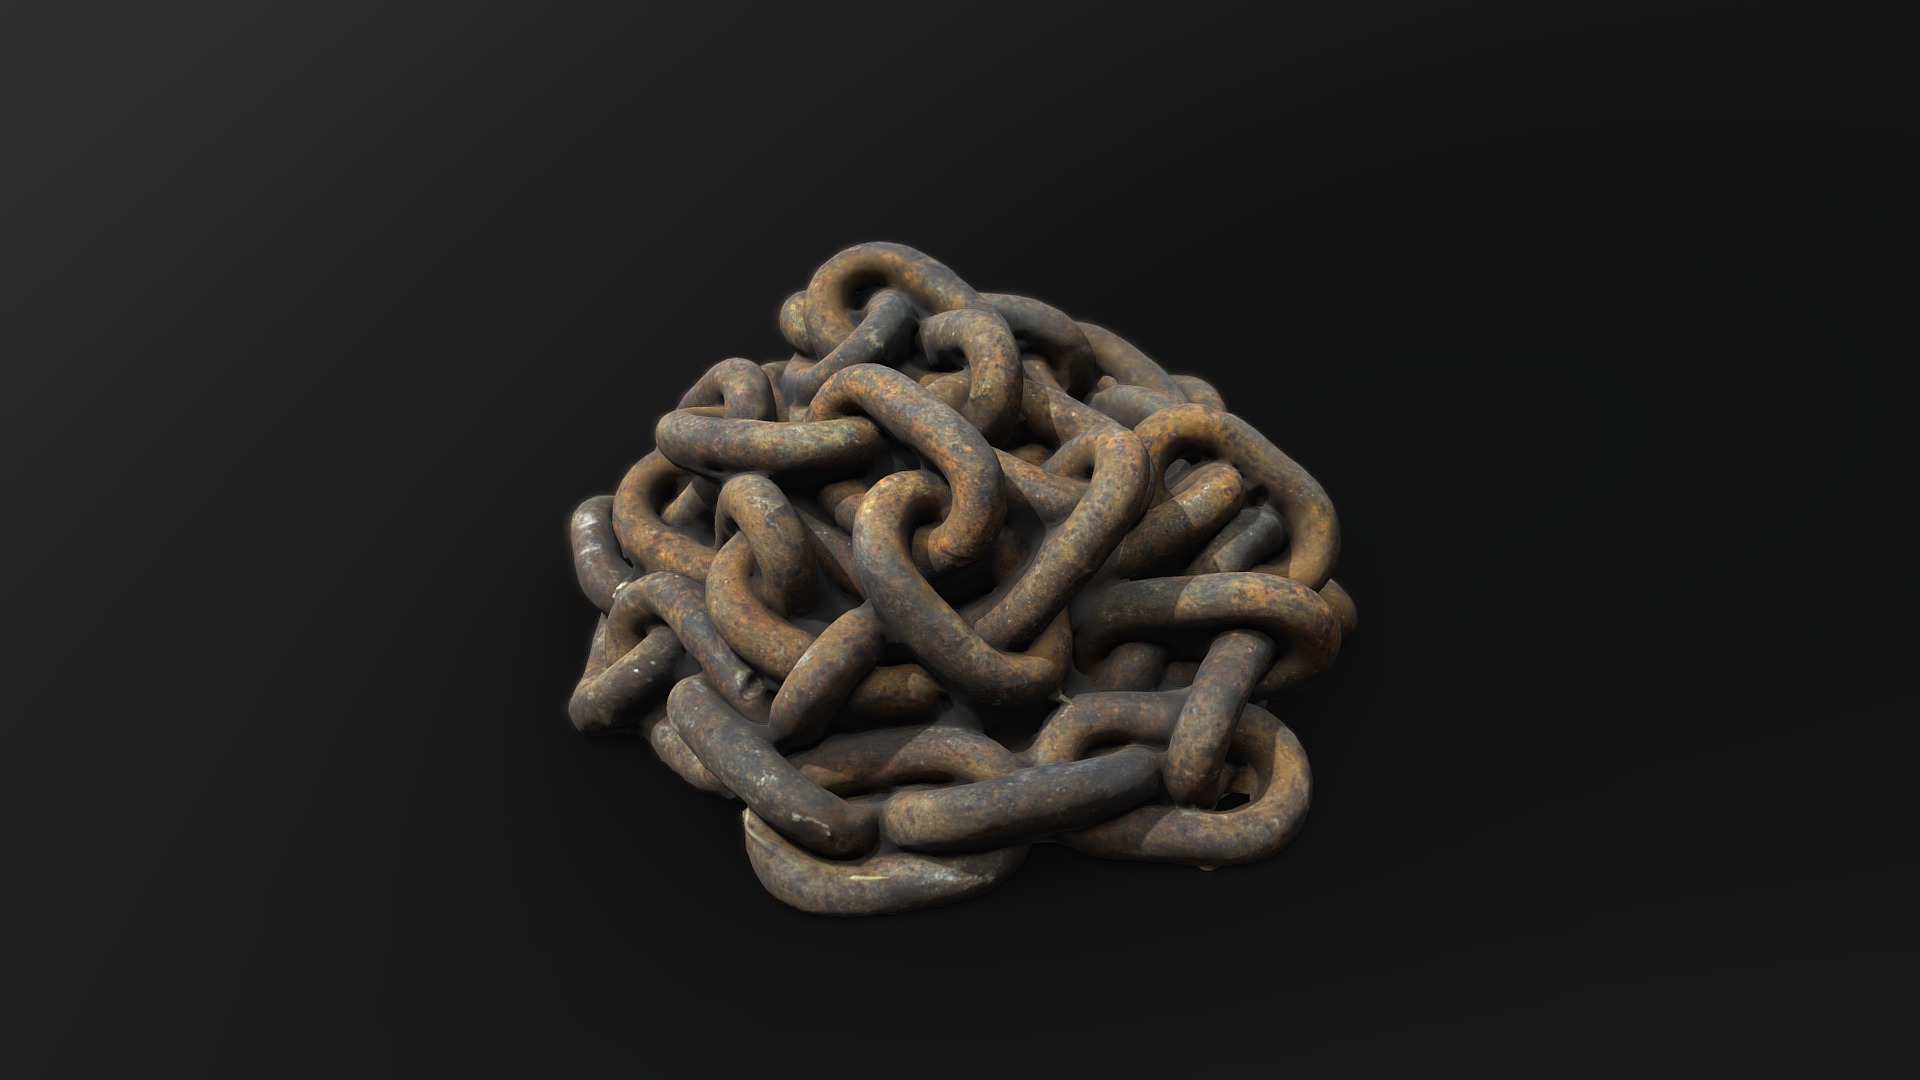 3D model Pile of Rusty Chains (photogrammetry scan) - This is a 3D model of the Pile of Rusty Chains (photogrammetry scan). The 3D model is about a pile of wood.